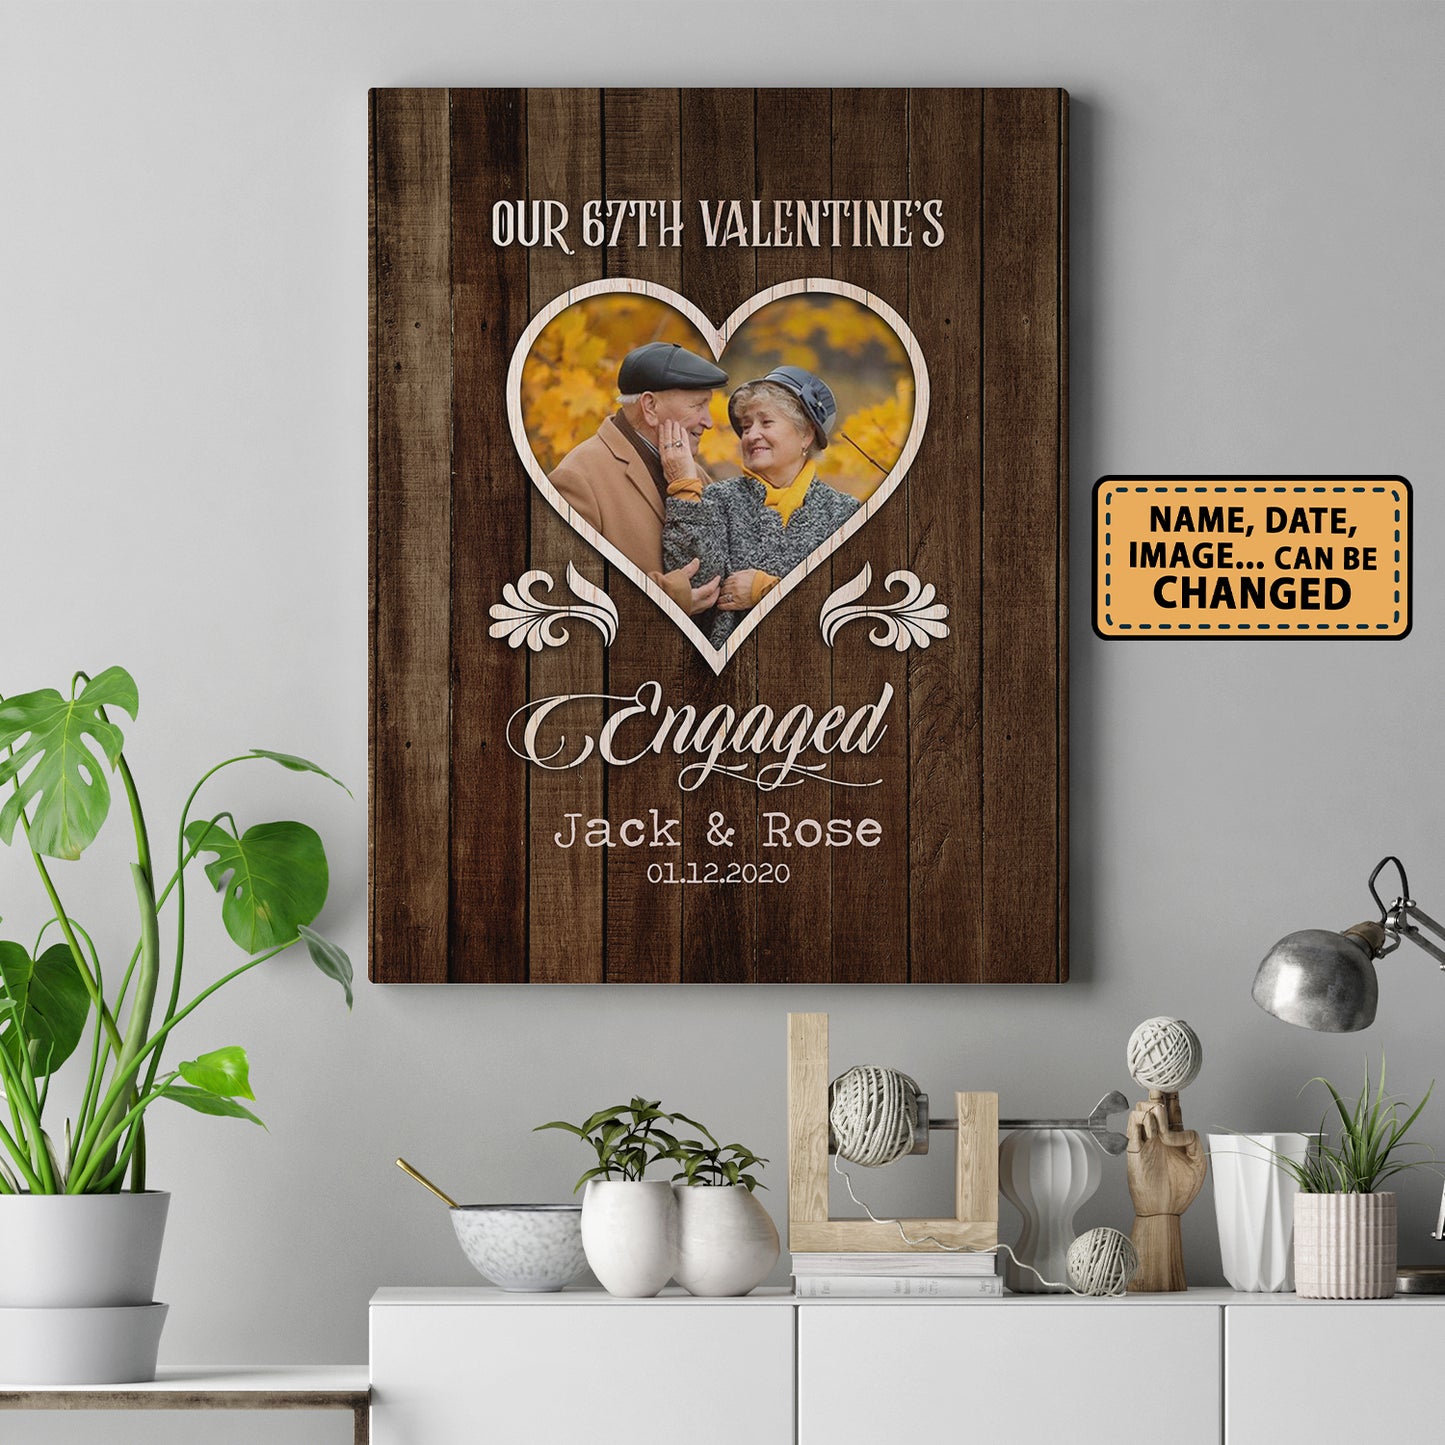 Our 67th Valentine’s Day Engaged Custom Image Anniversary Canvas